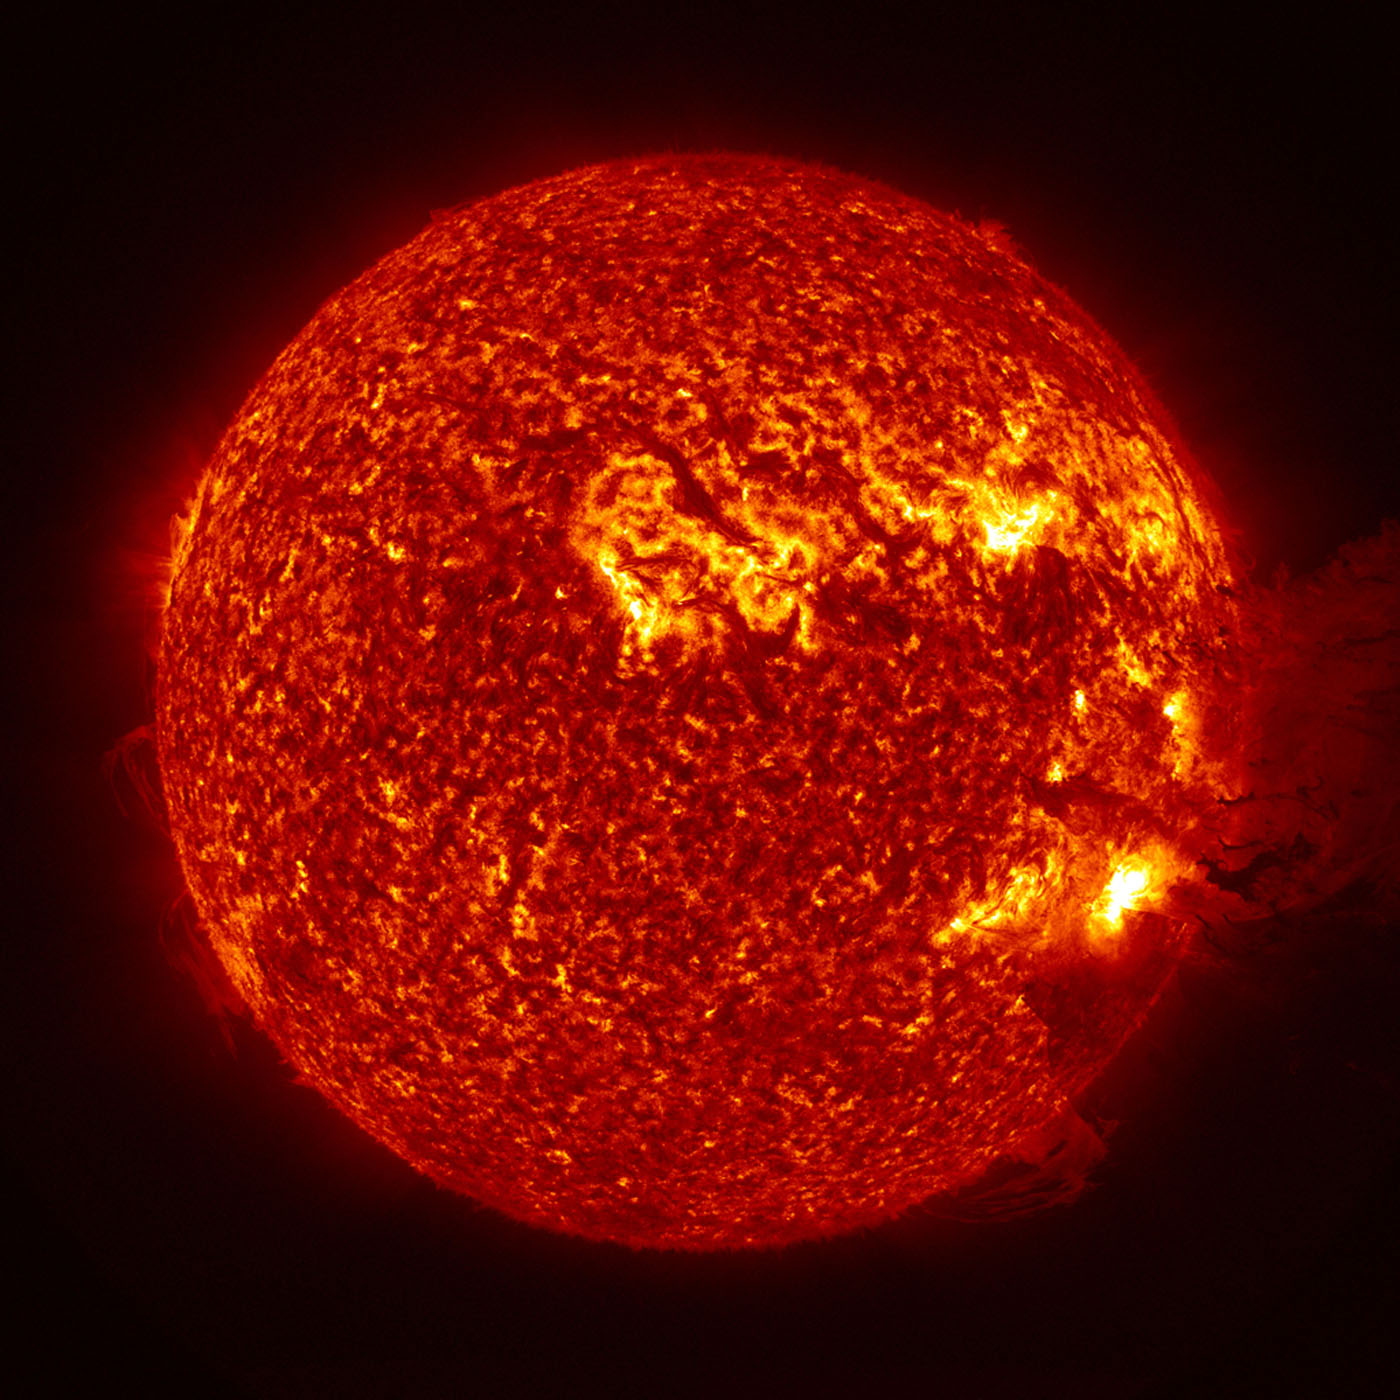 NASA Science Visualization Studio image of the surface of the sun.